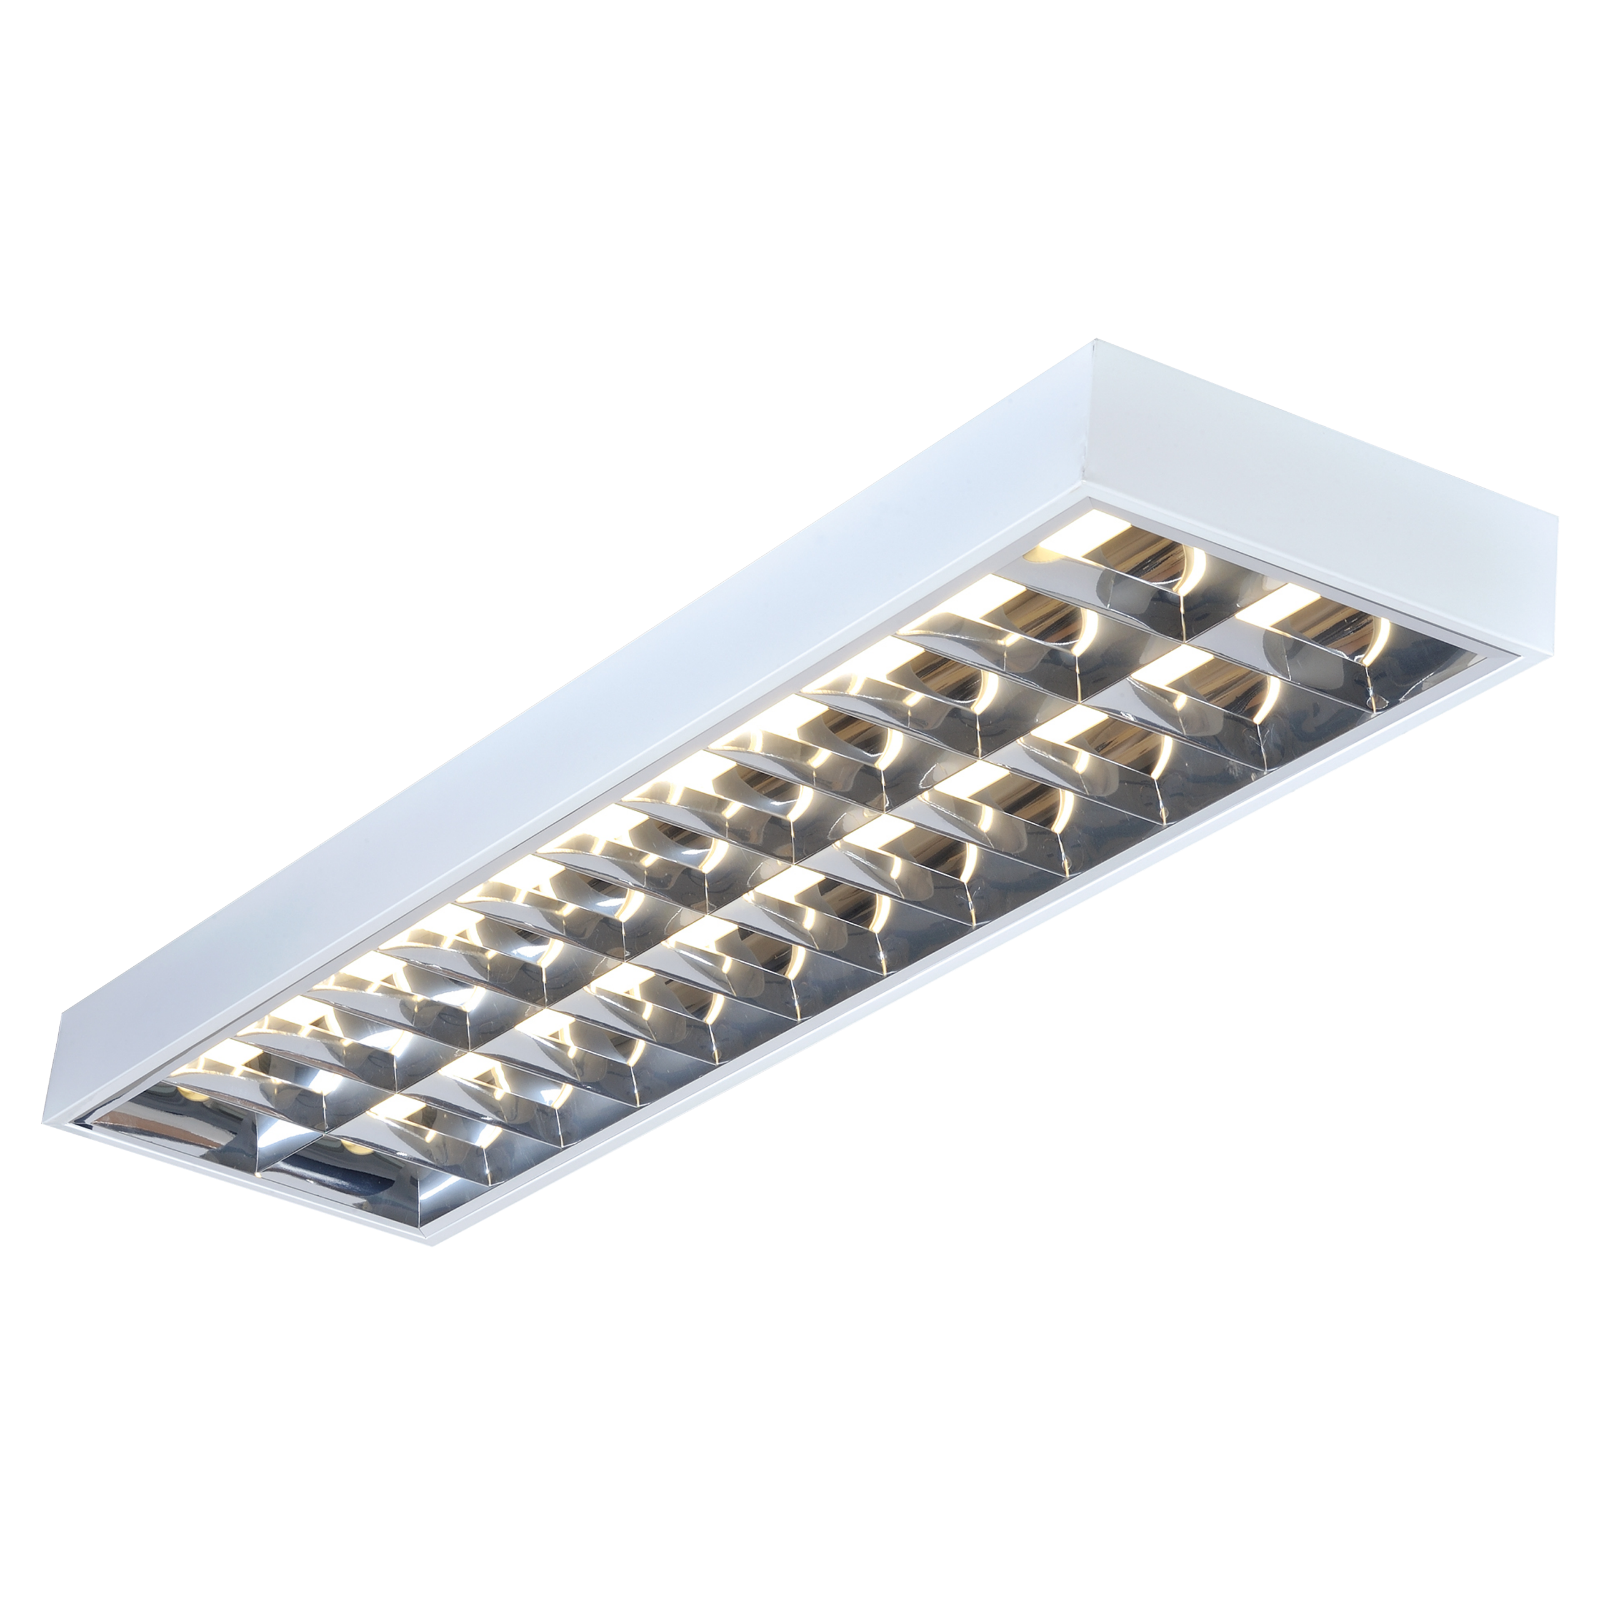 IP20 2x58W 5ft T8 Surface Mounted Fluorescent Fitting 1520x304x80mm - SURF258HF 